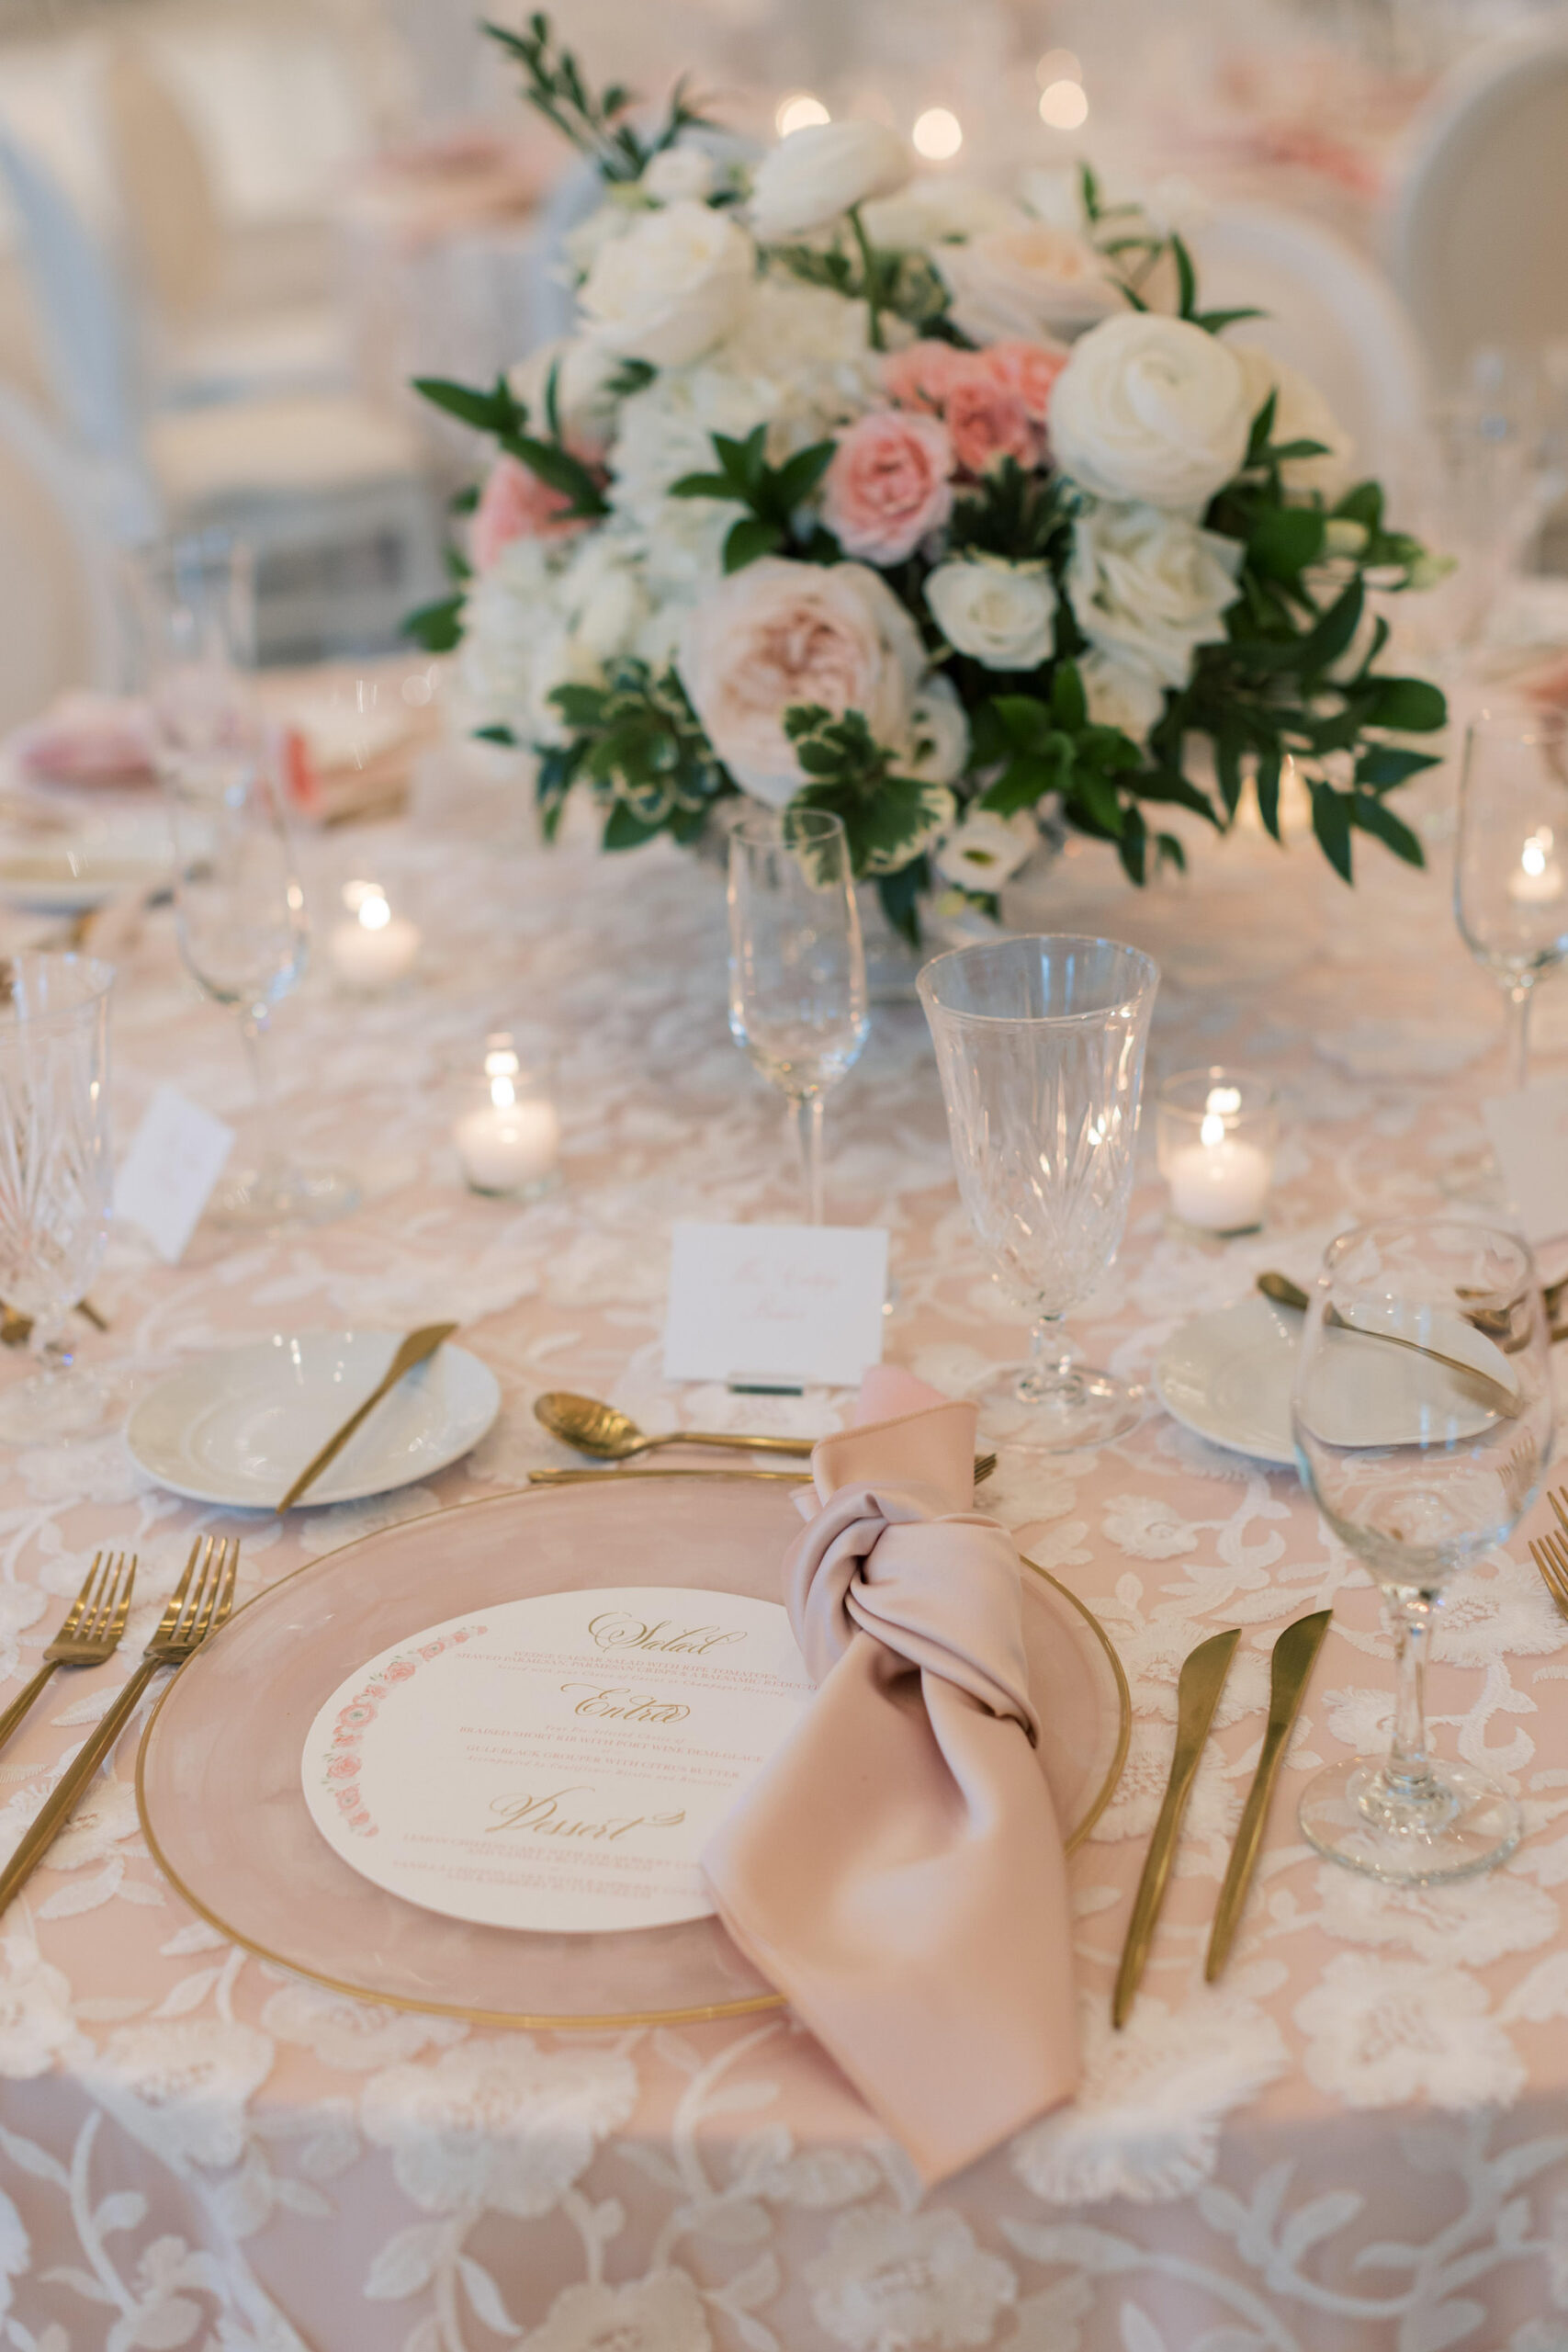 Pink and White Old Florida Black Tie Wedding Reception Table Decor Ideas | Tampa Bay Planner Parties A' La Carte